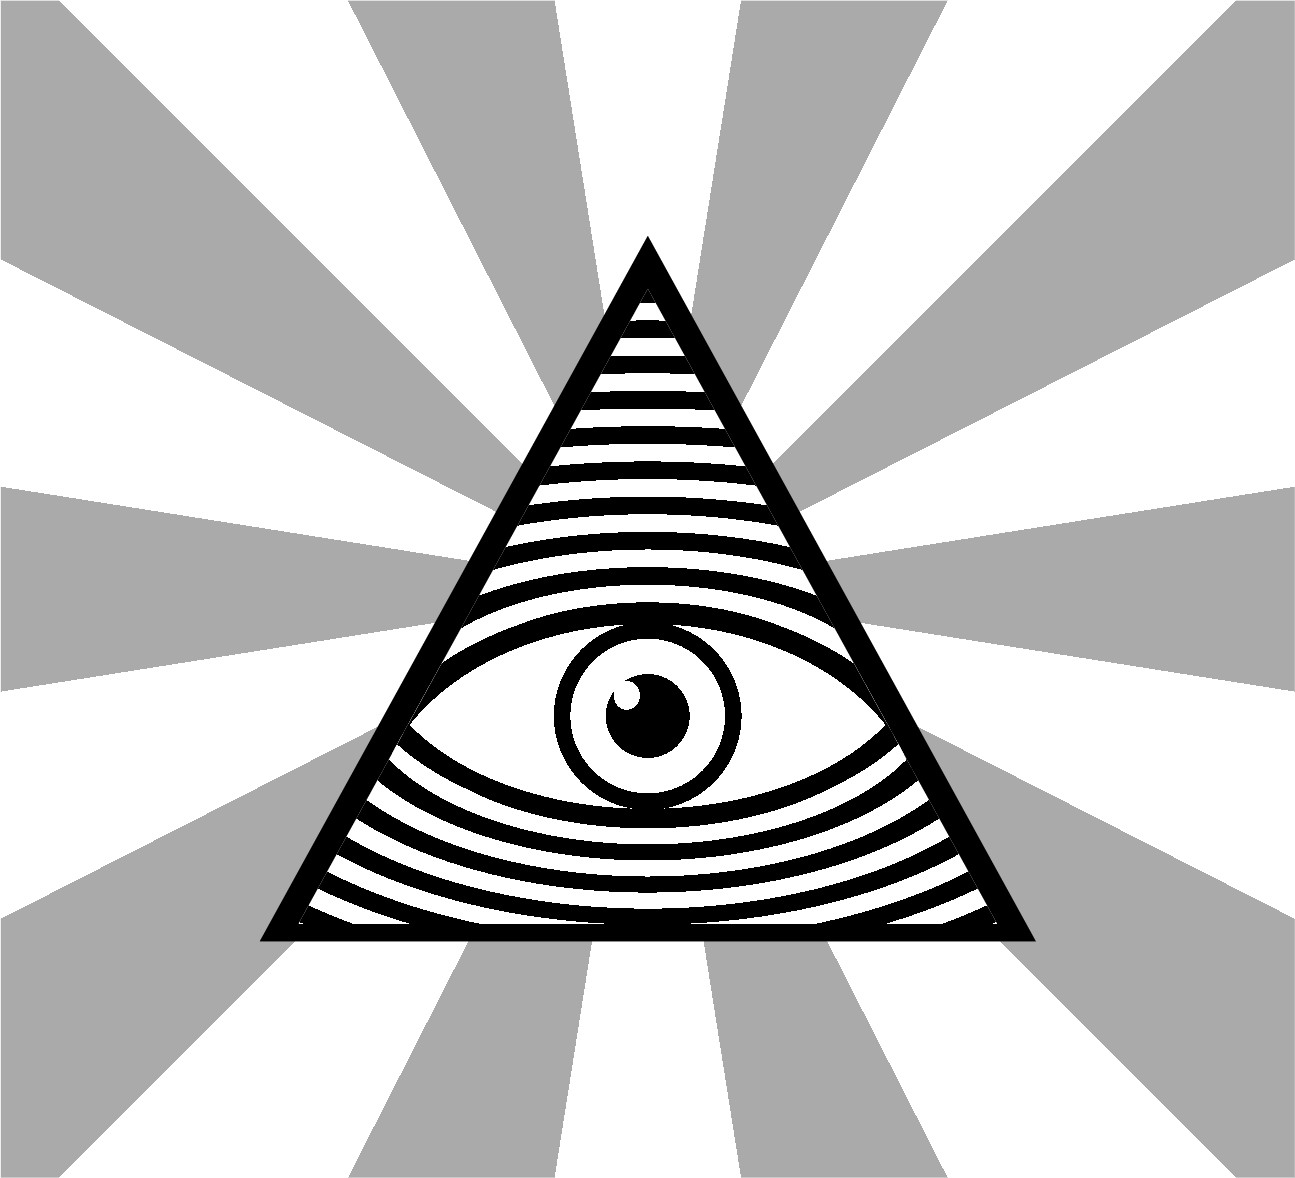 Cartoon of the all-seeing eye of providence